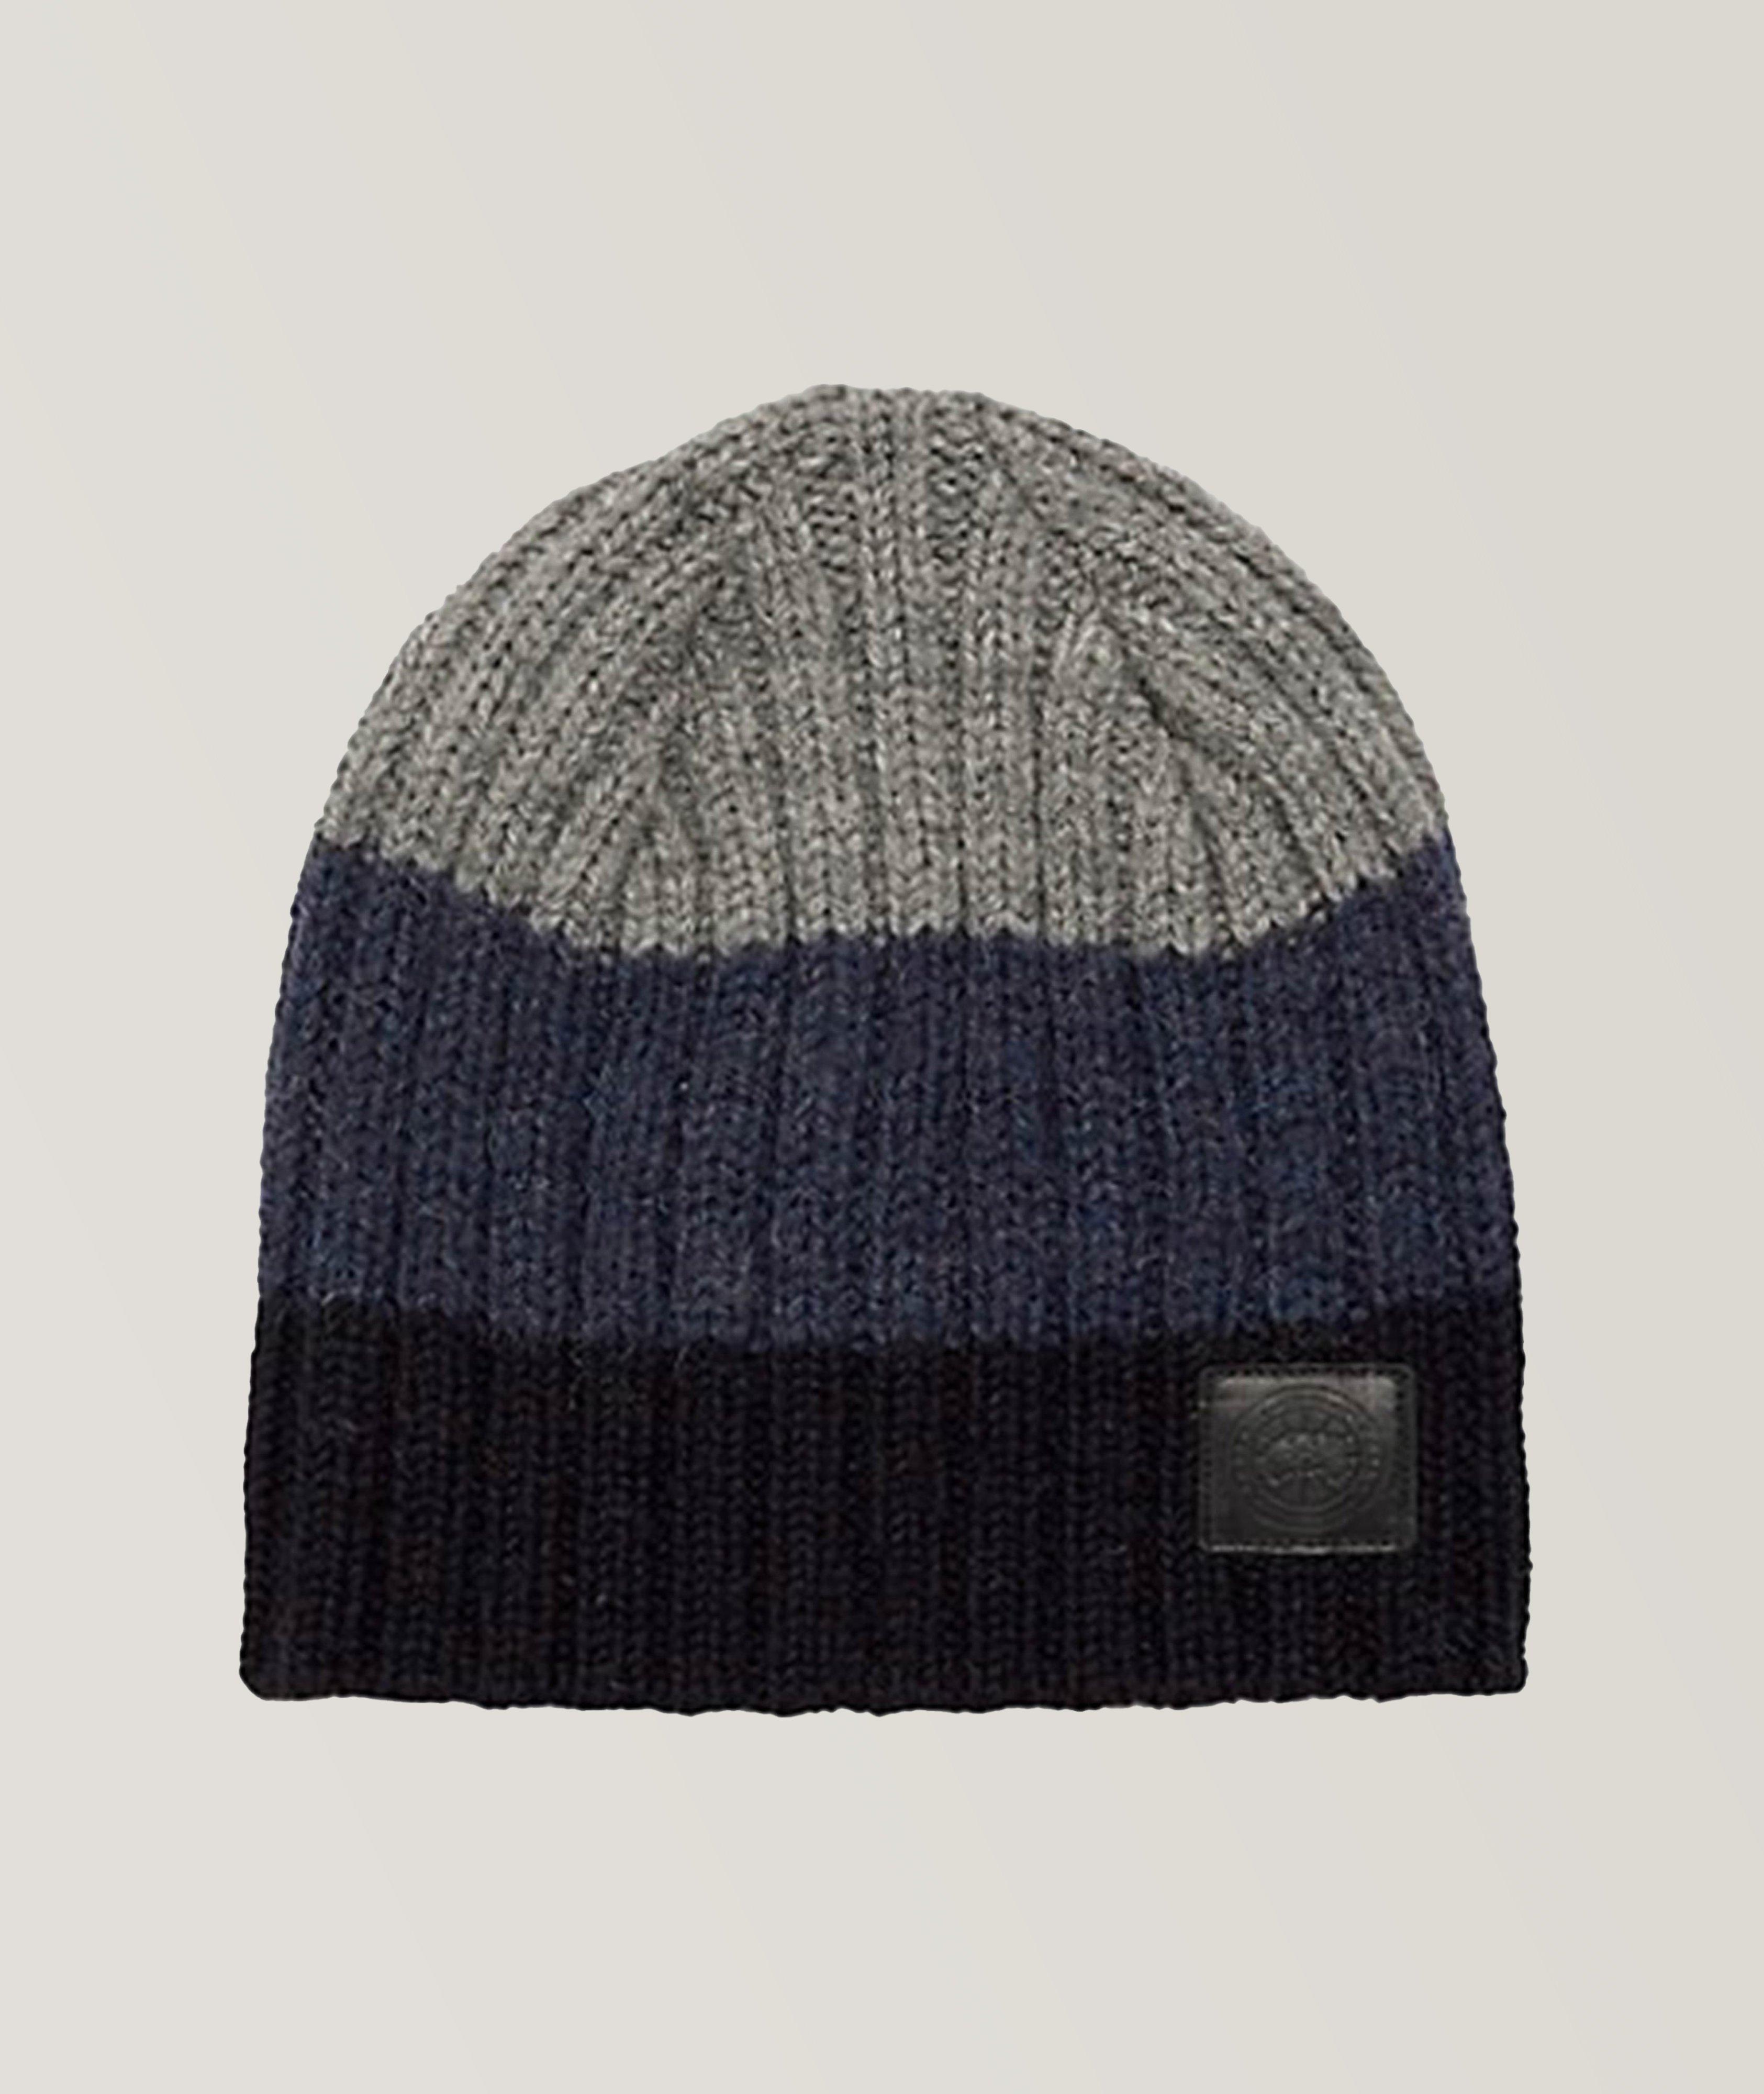 Ribbed Block Slouch Wool Beanie image 0